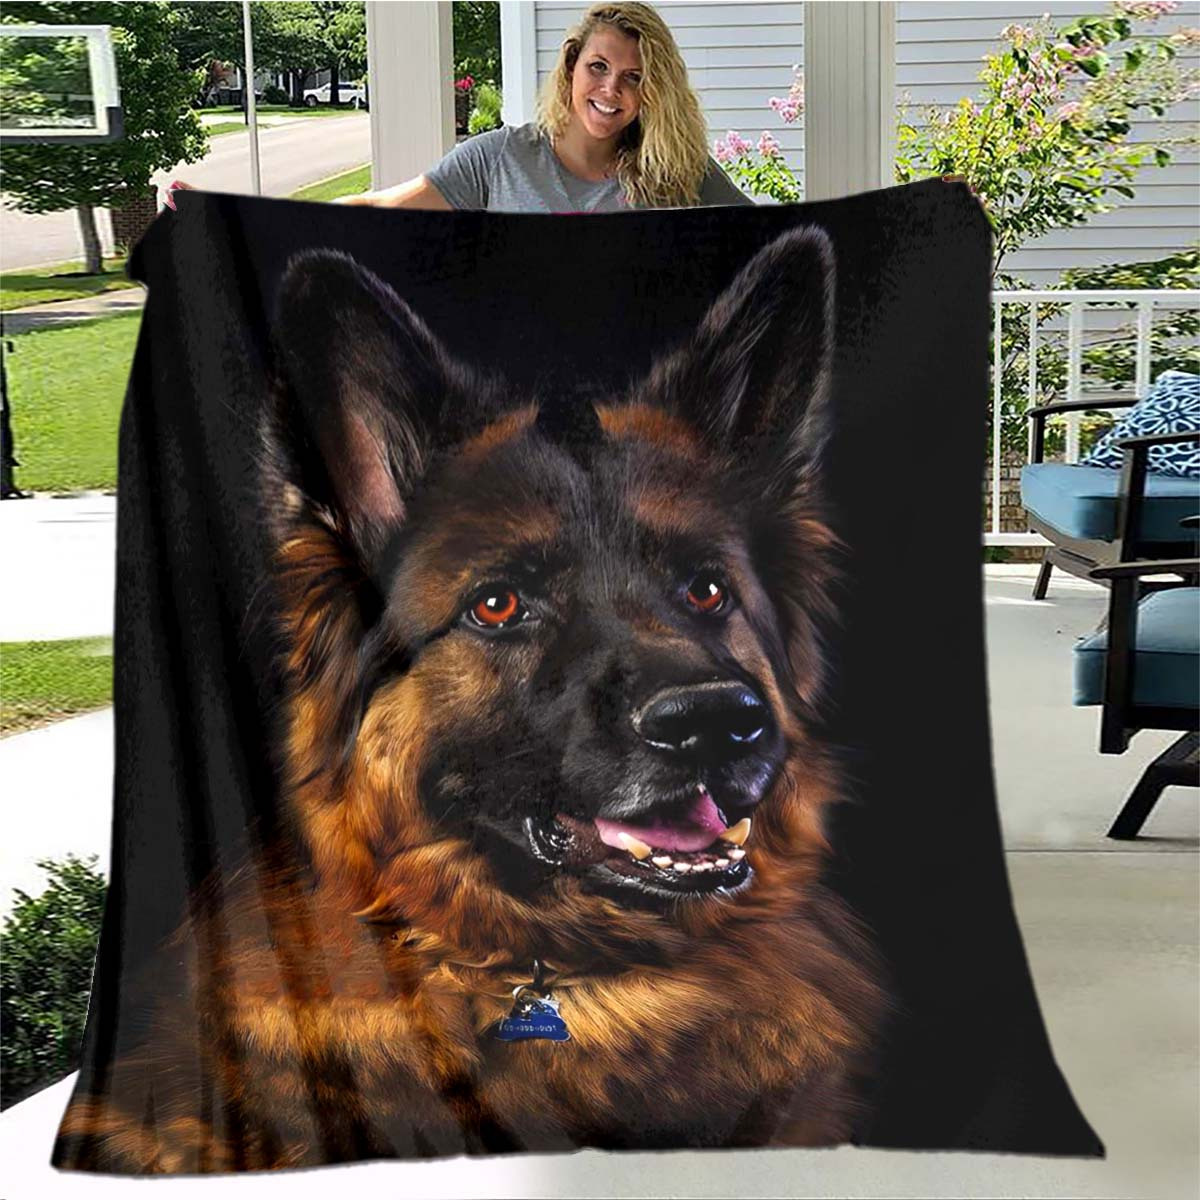 

1pc Black Wolf Dog Fashionable Plush All Seasons Lightweight, Warm And Comfortable Flannel Blanket Living Room Bedroom Bed Sofa Picnic Blanket Bed Chair Car Travel Rest Cover Blanket